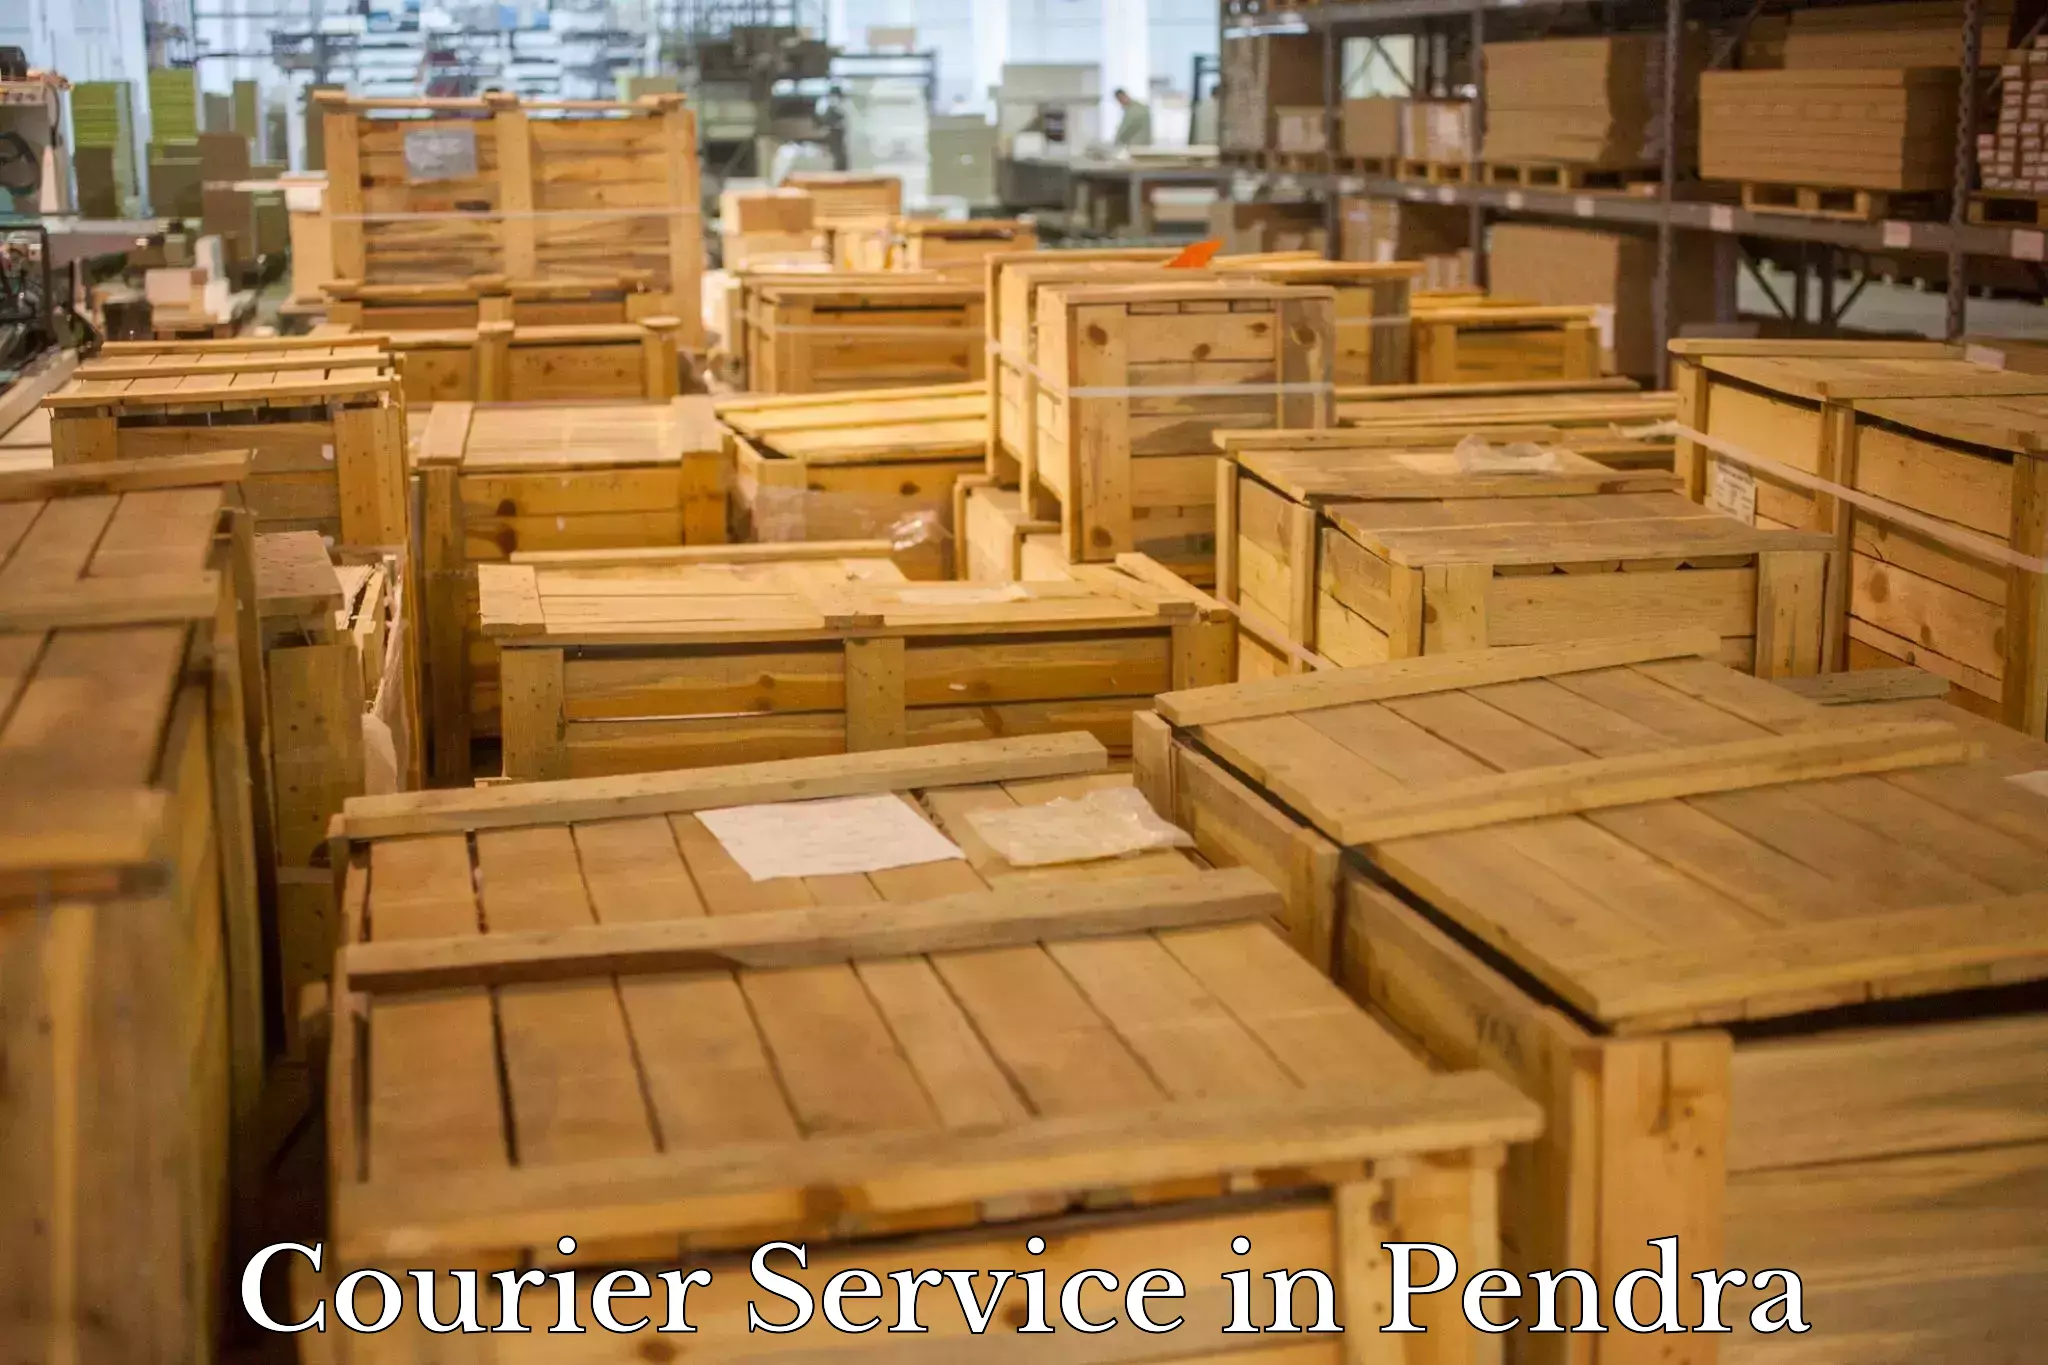 Customer-friendly courier services in Pendra